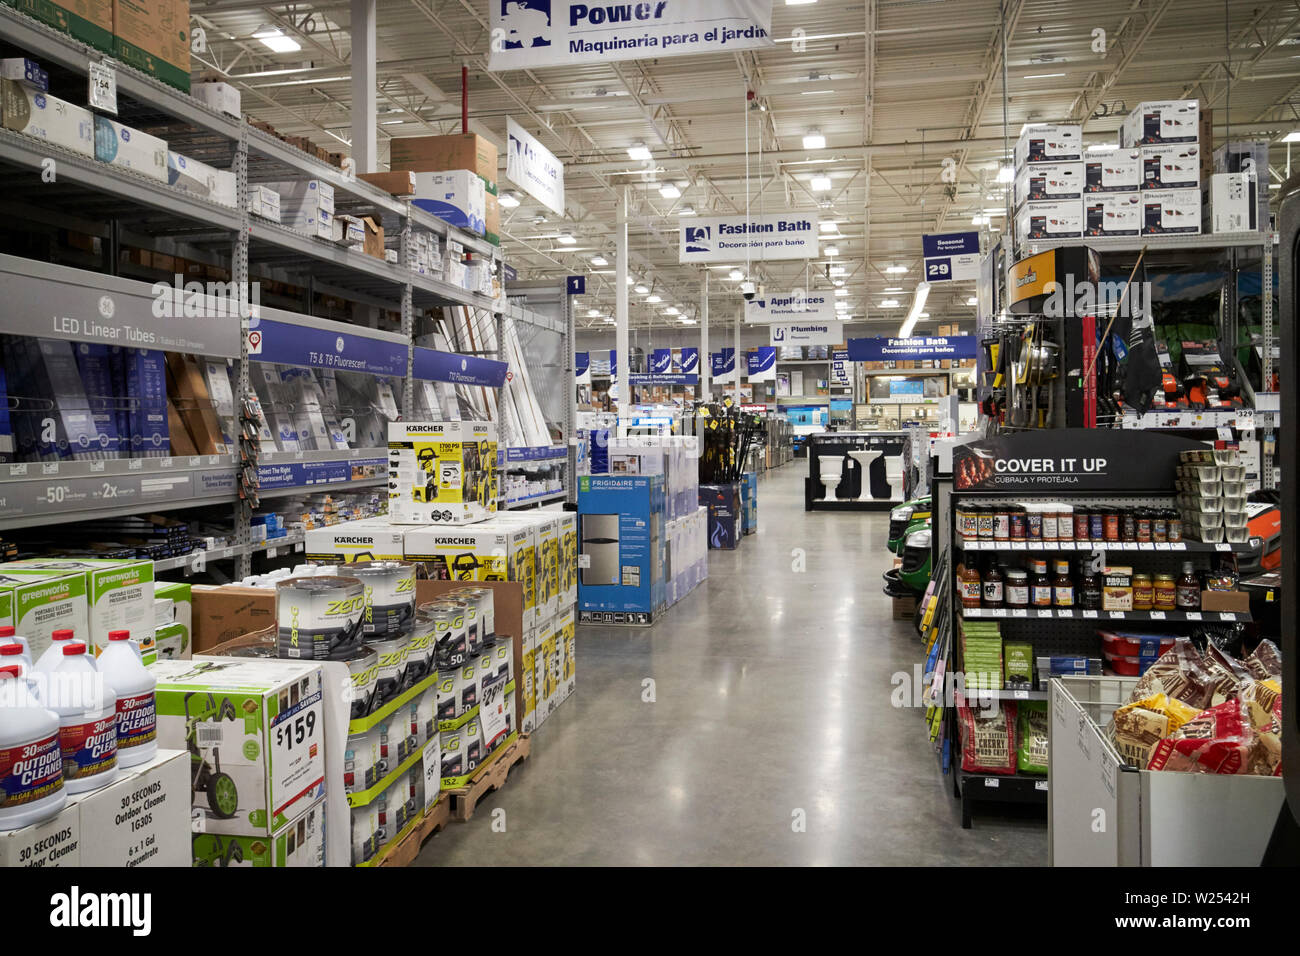 Inside A Lowes Home Improvements Store Jacksonville Florida Usa W2542H 